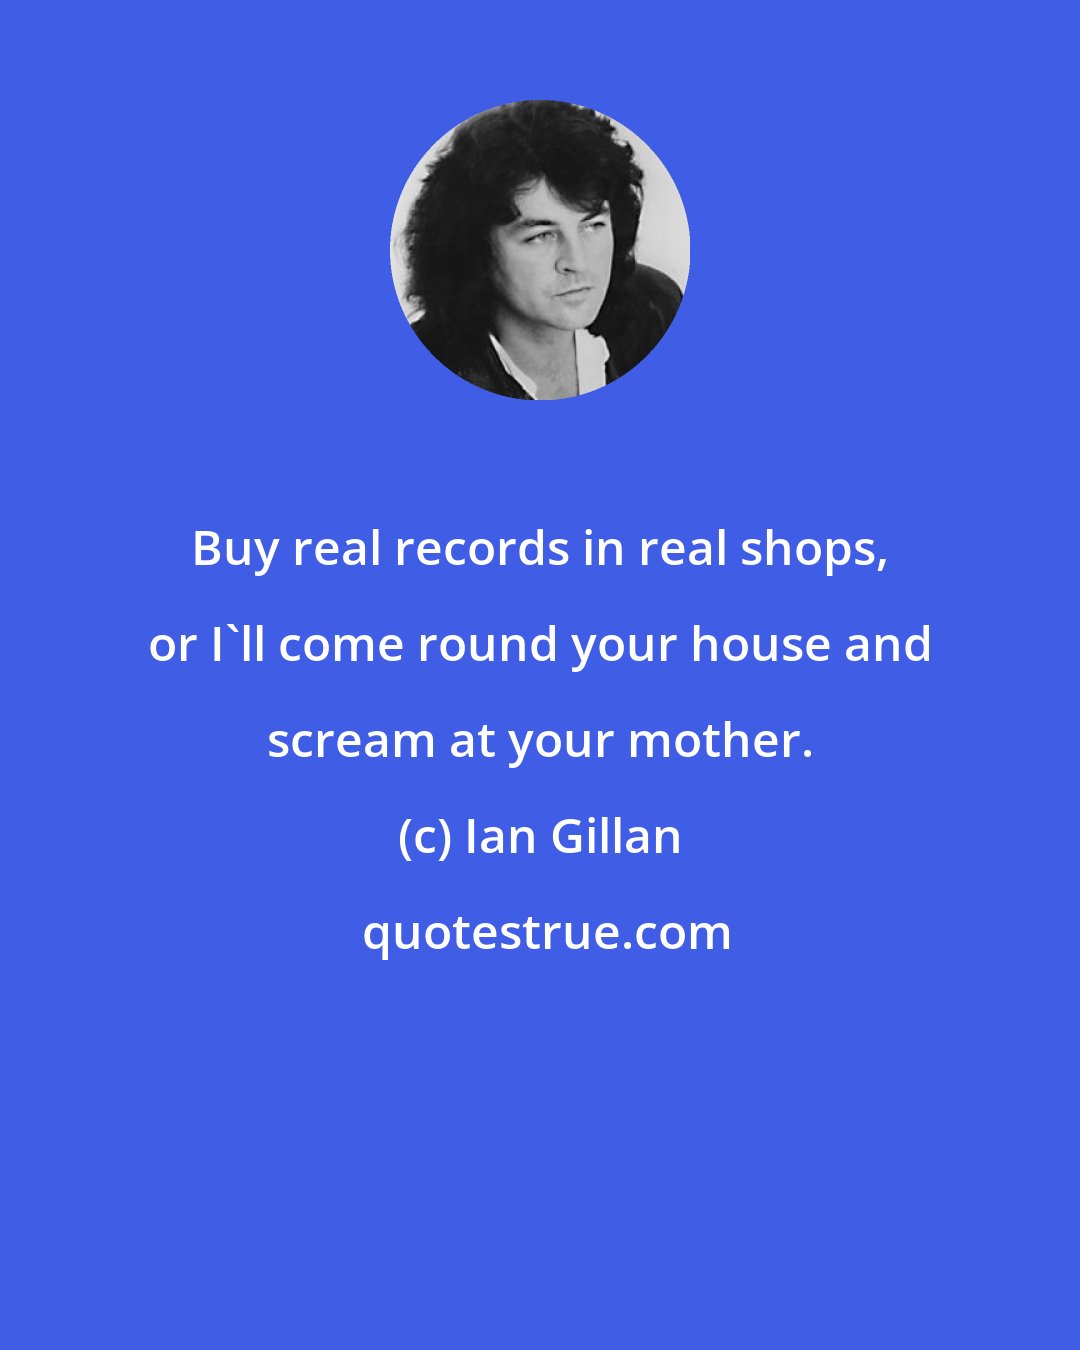 Ian Gillan: Buy real records in real shops, or I'll come round your house and scream at your mother.